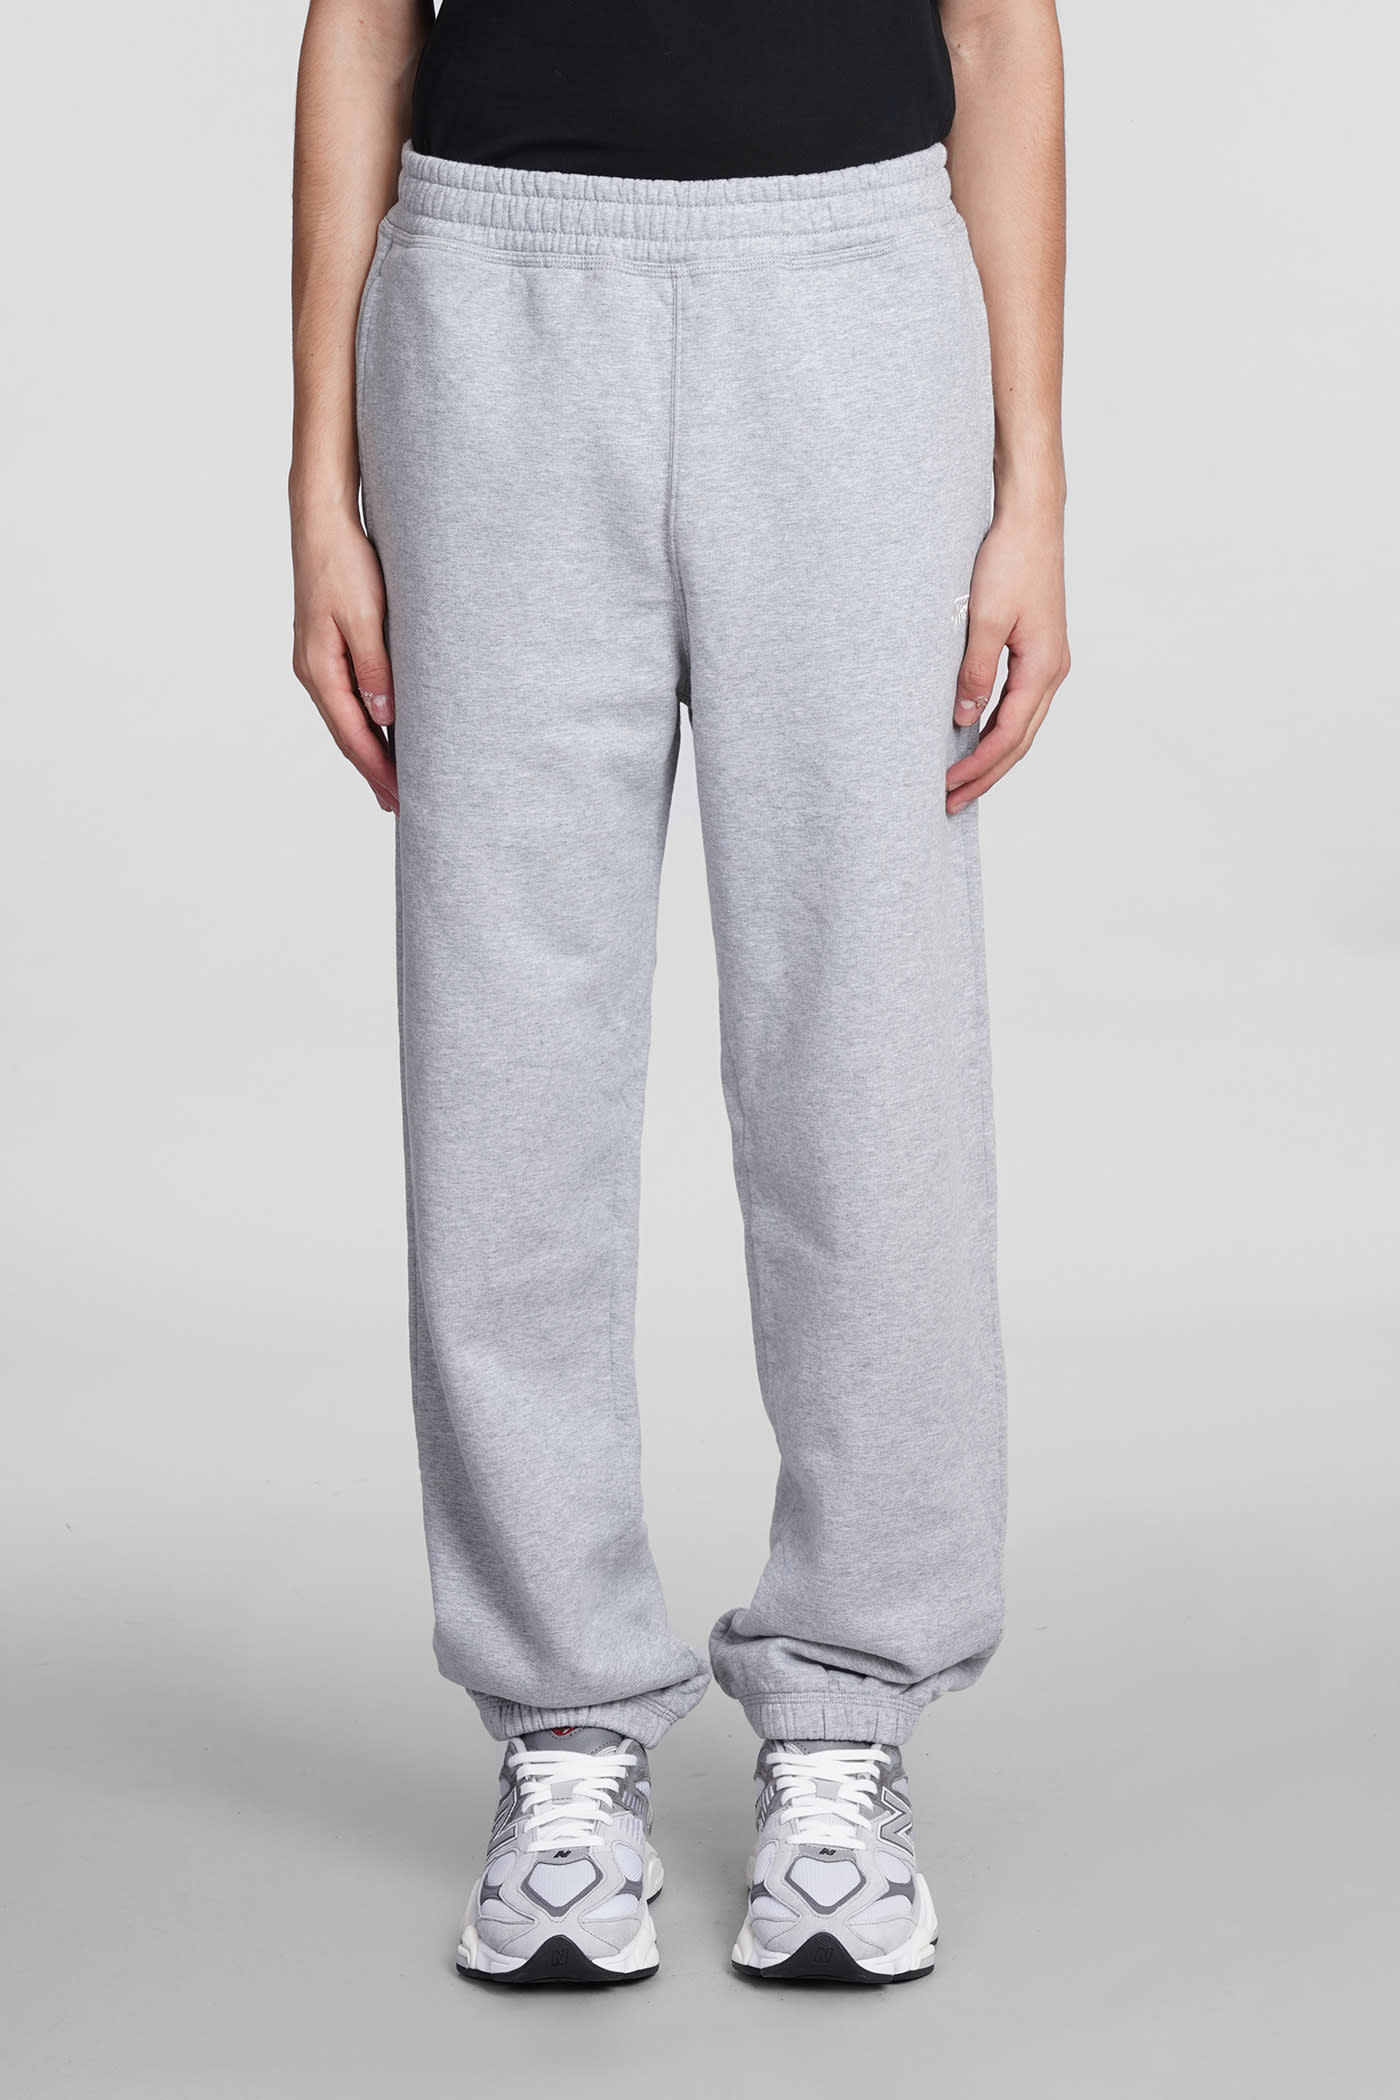 Stussy Pants In Grey Cotton